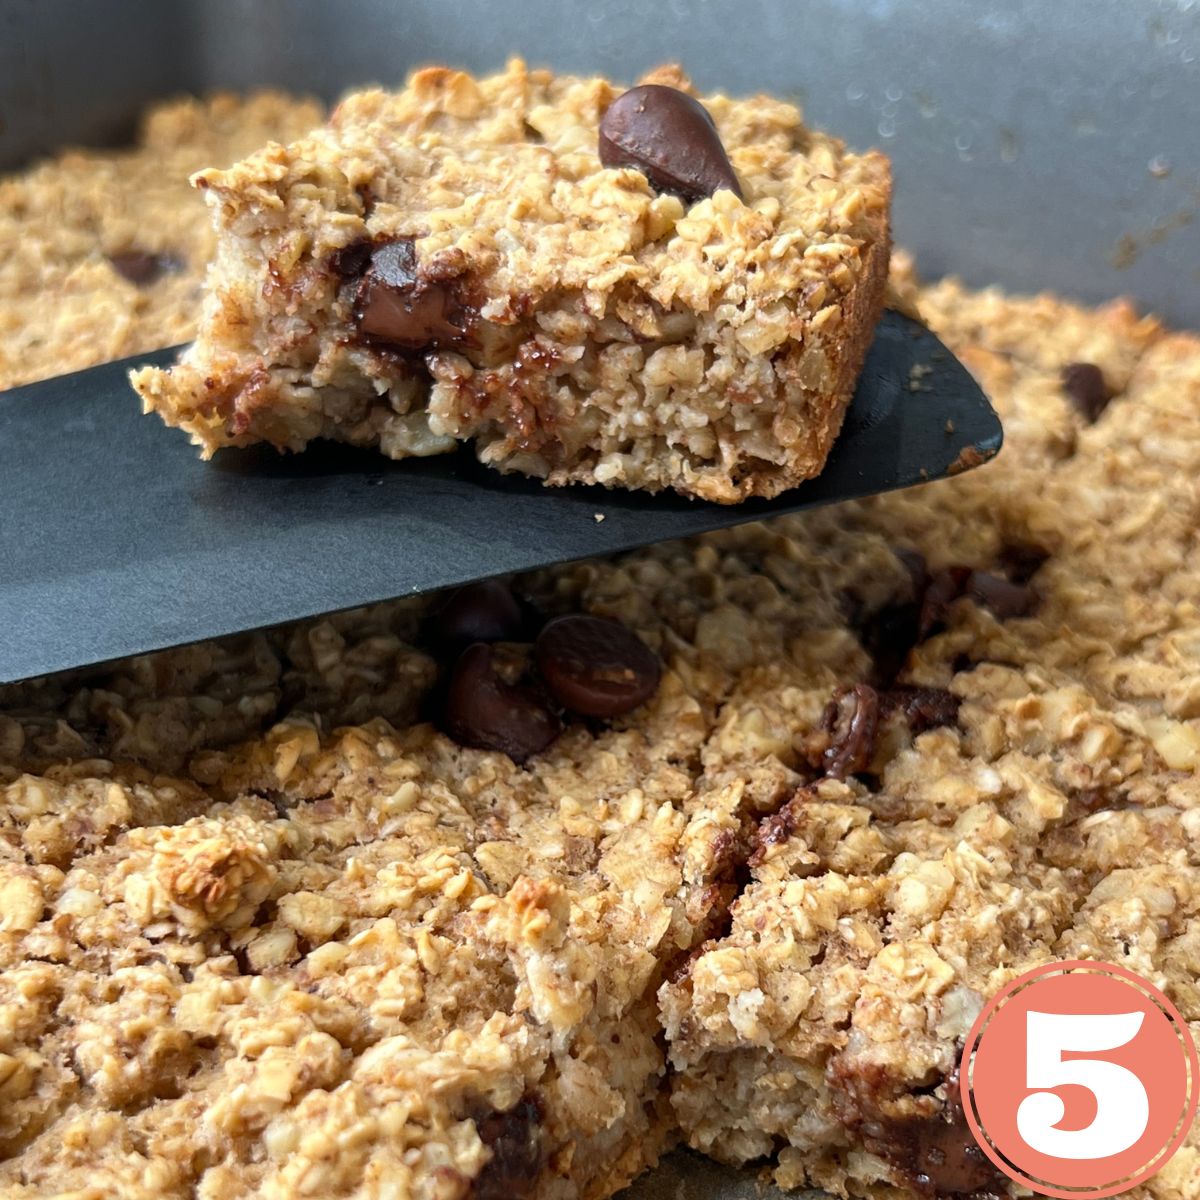 A slice of baked oatmeal with chocolate chips on a black spatula over a pan of baked oatmeal